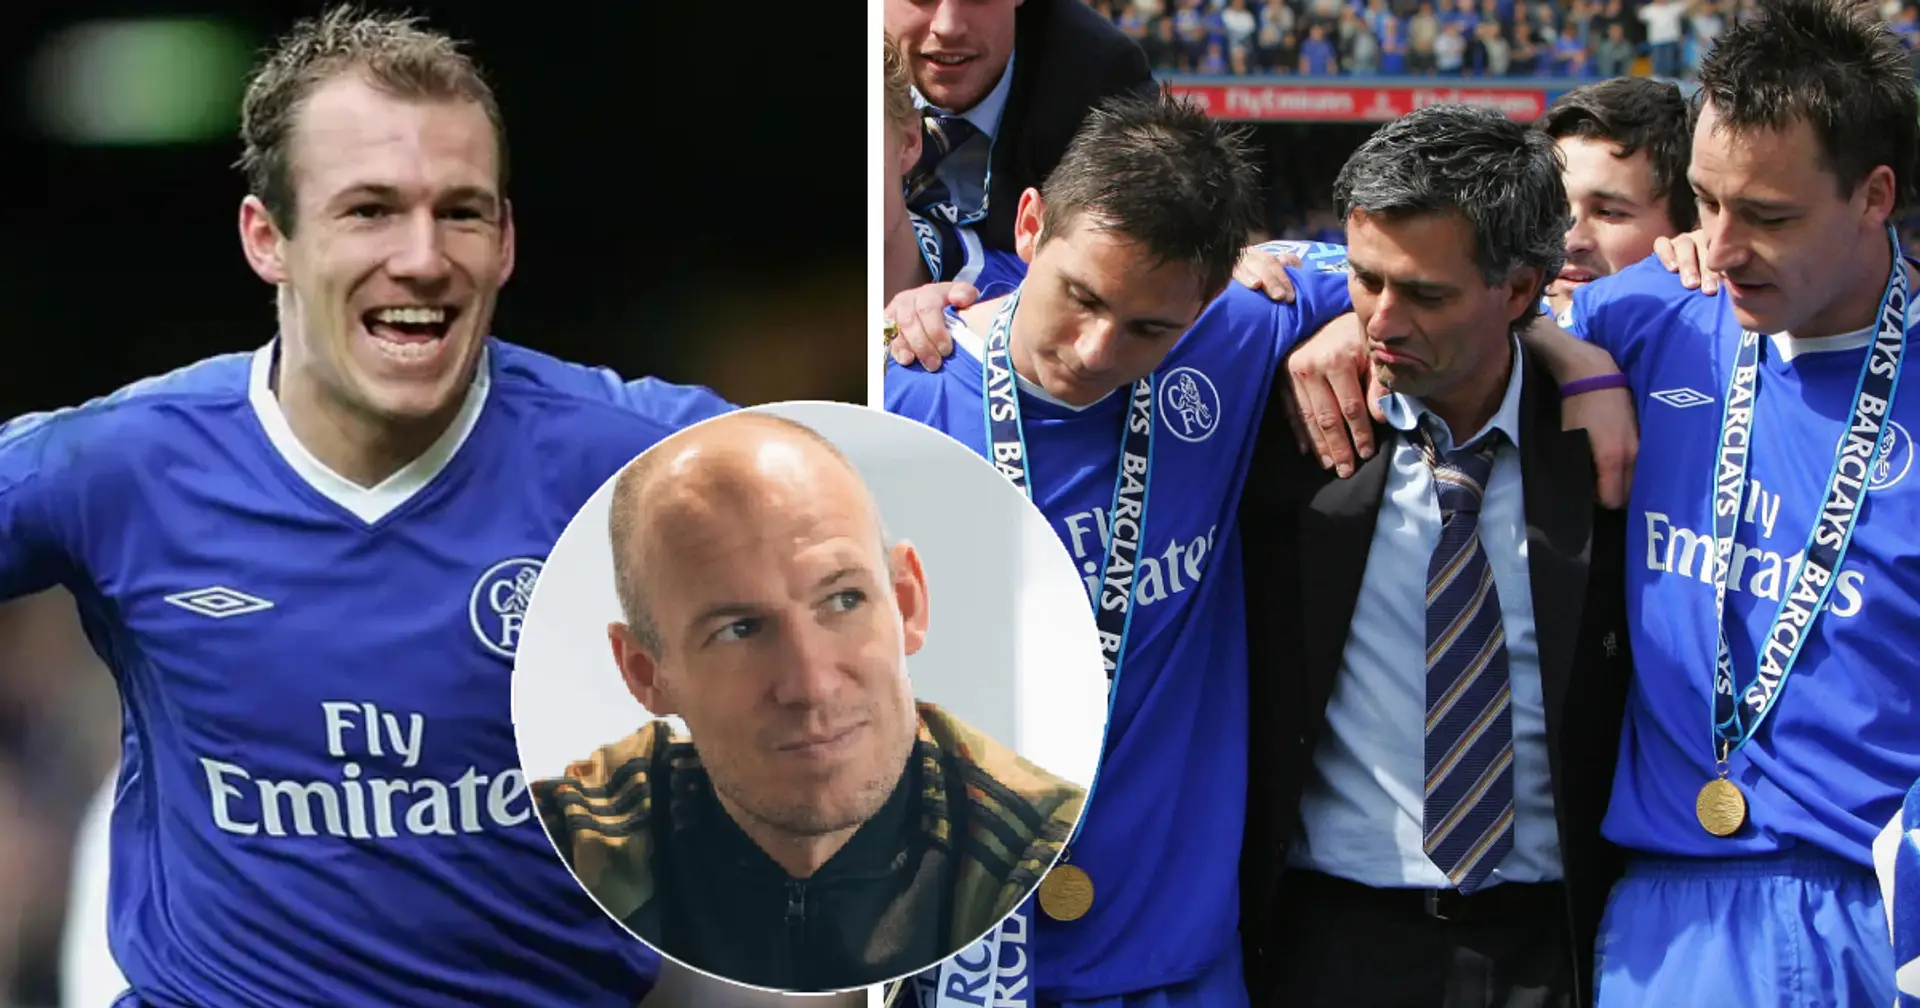 'At Chelsea, you will be a part of history': Remembering Robben's amazing words about Blues in open letter to his younger self